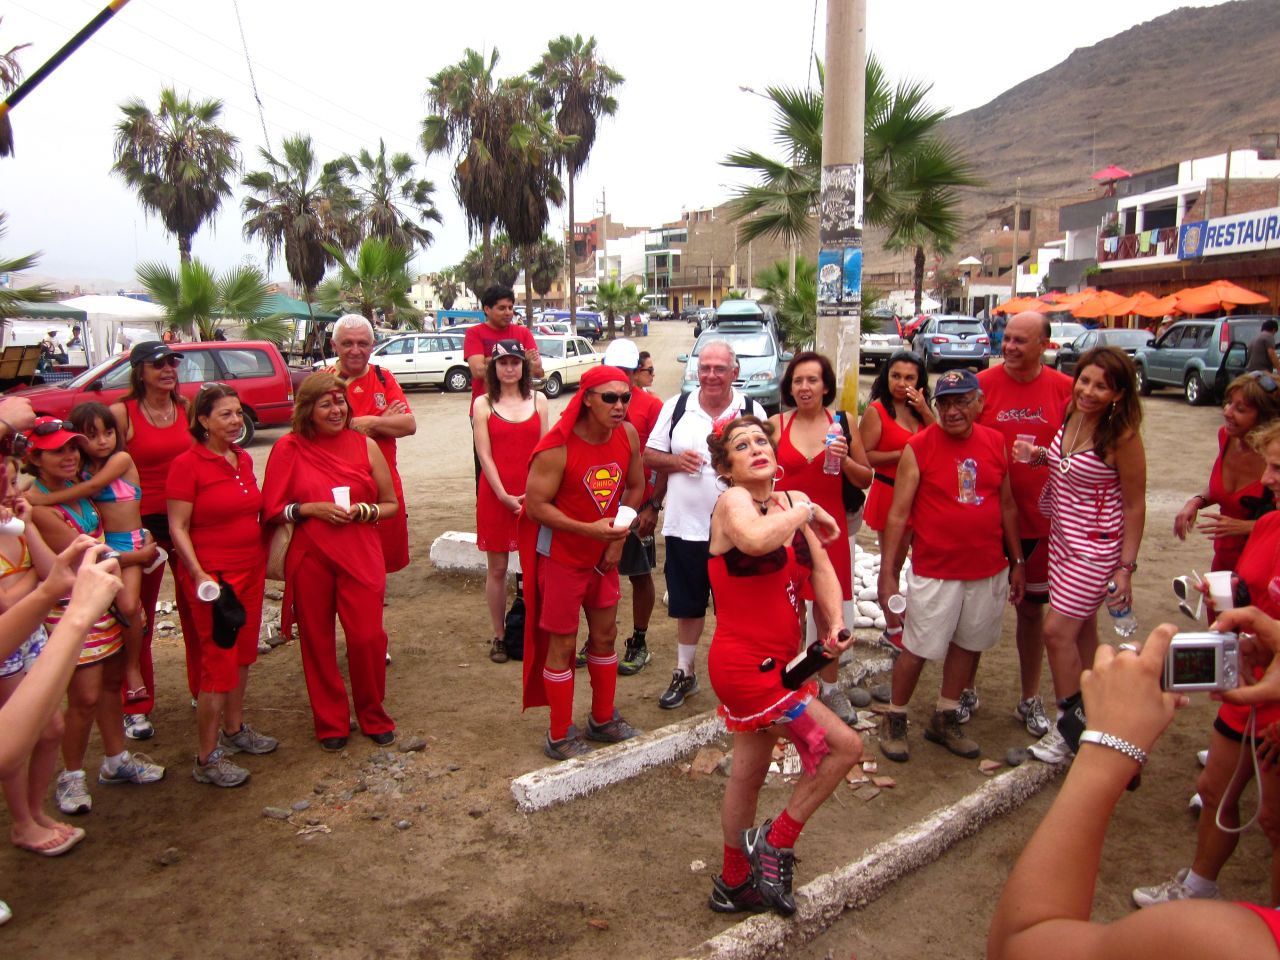 Newcomers are introduced at a Red Dress Run in Peru. The Red Dress charity runs are a hashing tradition.